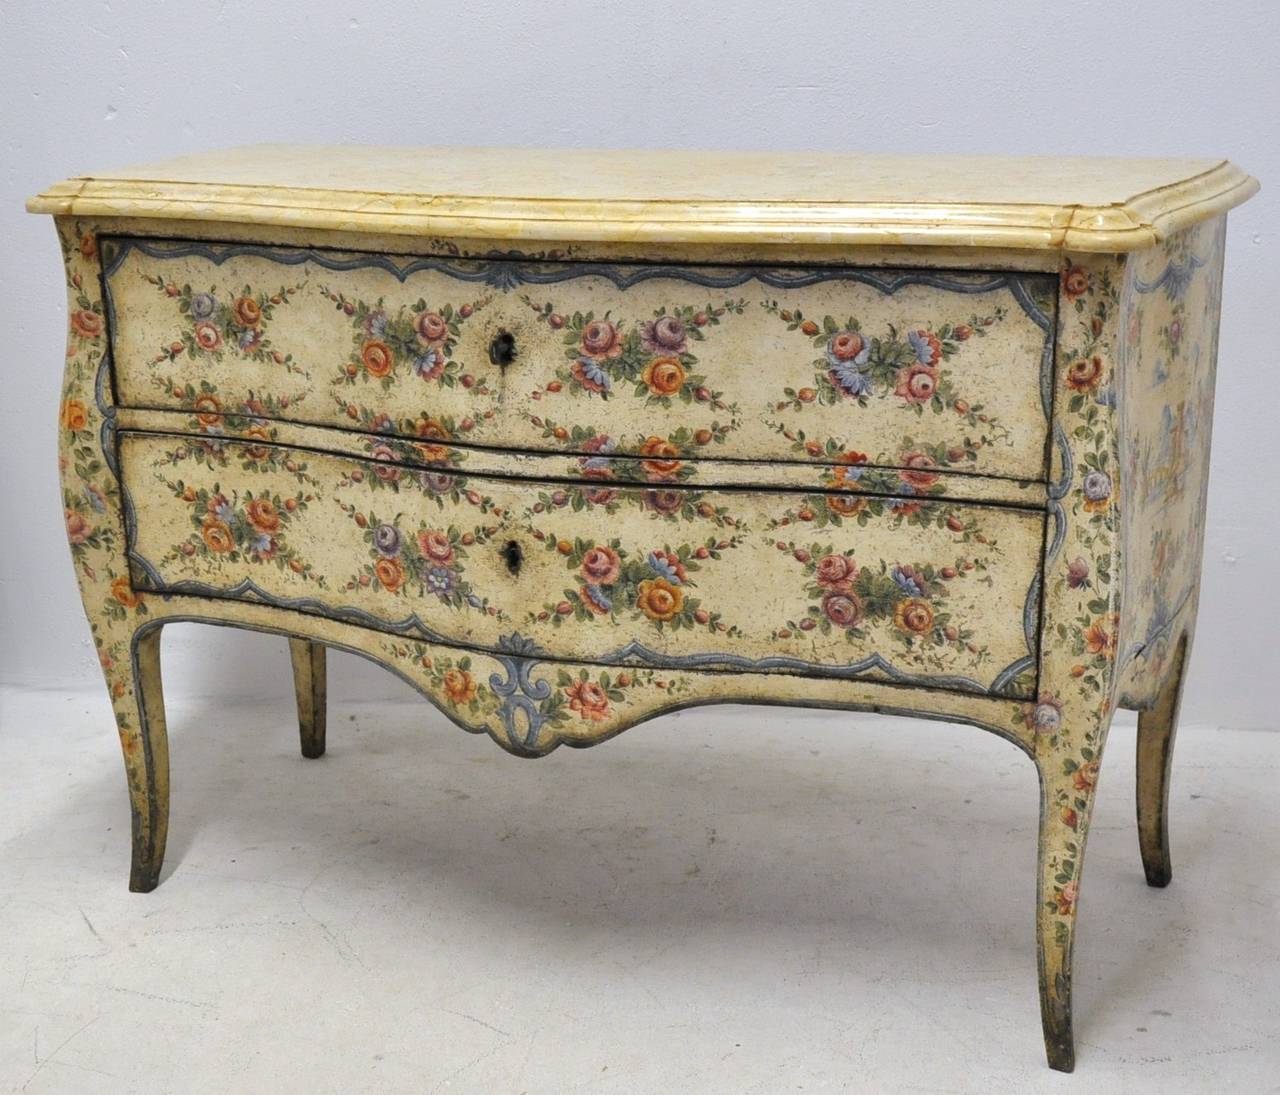 Fabulous venetian painted commode from Italy with marble top (c:1760). The paint is original on all 3 sides, the colors are still very fresh and vibrant. The original wood top is still available, but we replaced it with a beige stone.